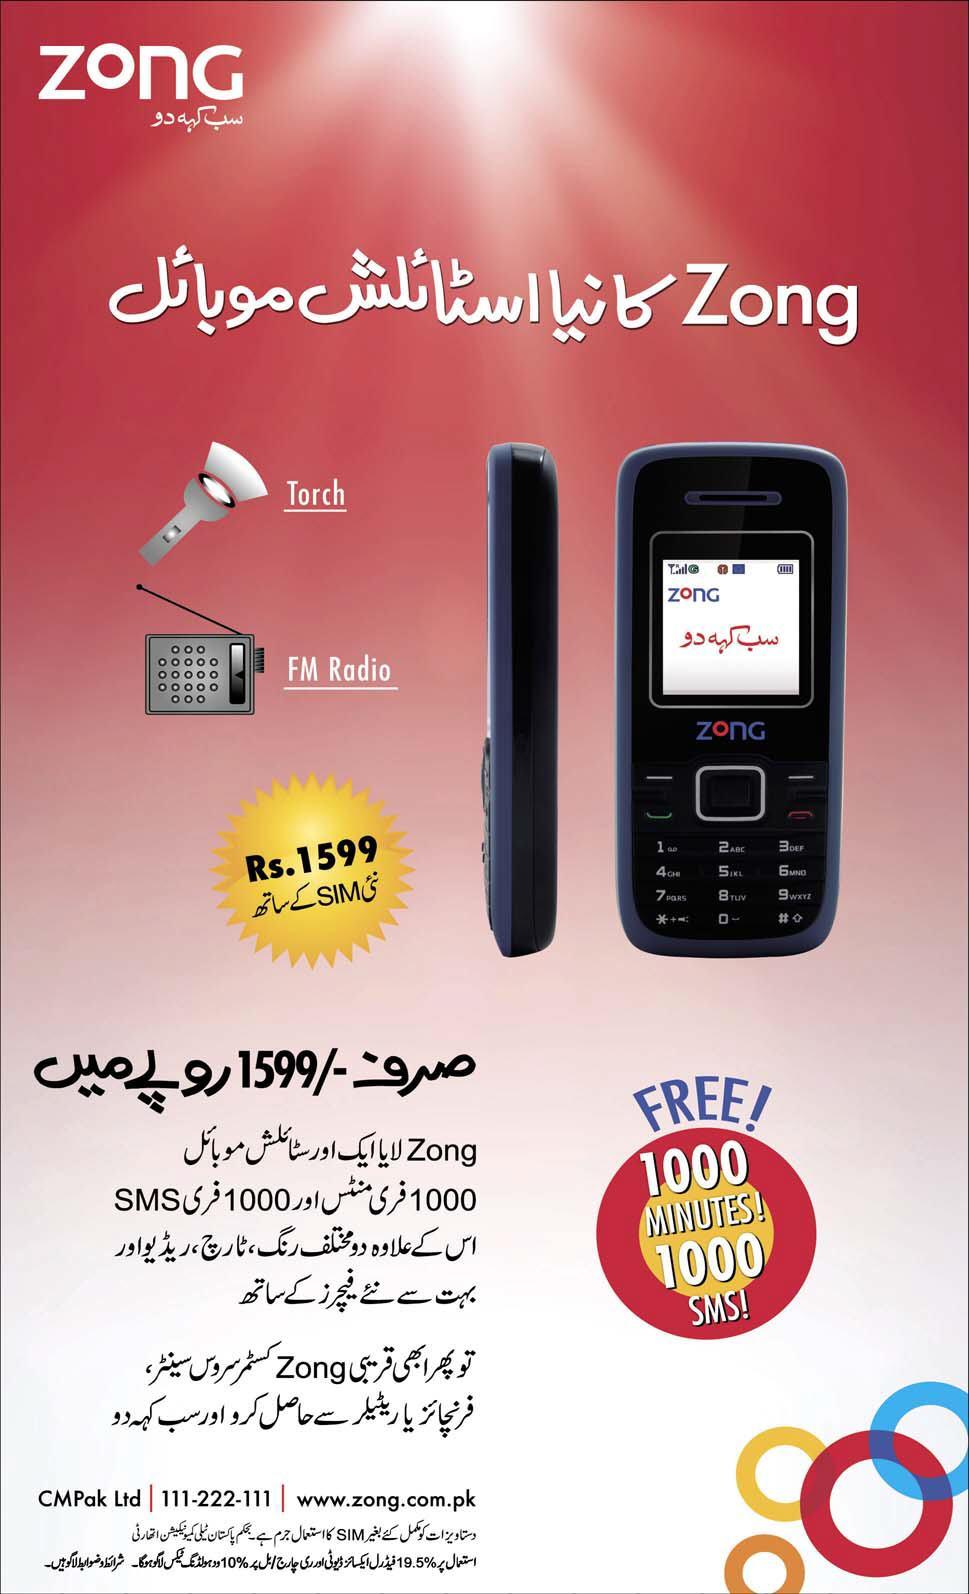 New Stylish ZONG Mobile In Rs. 1599